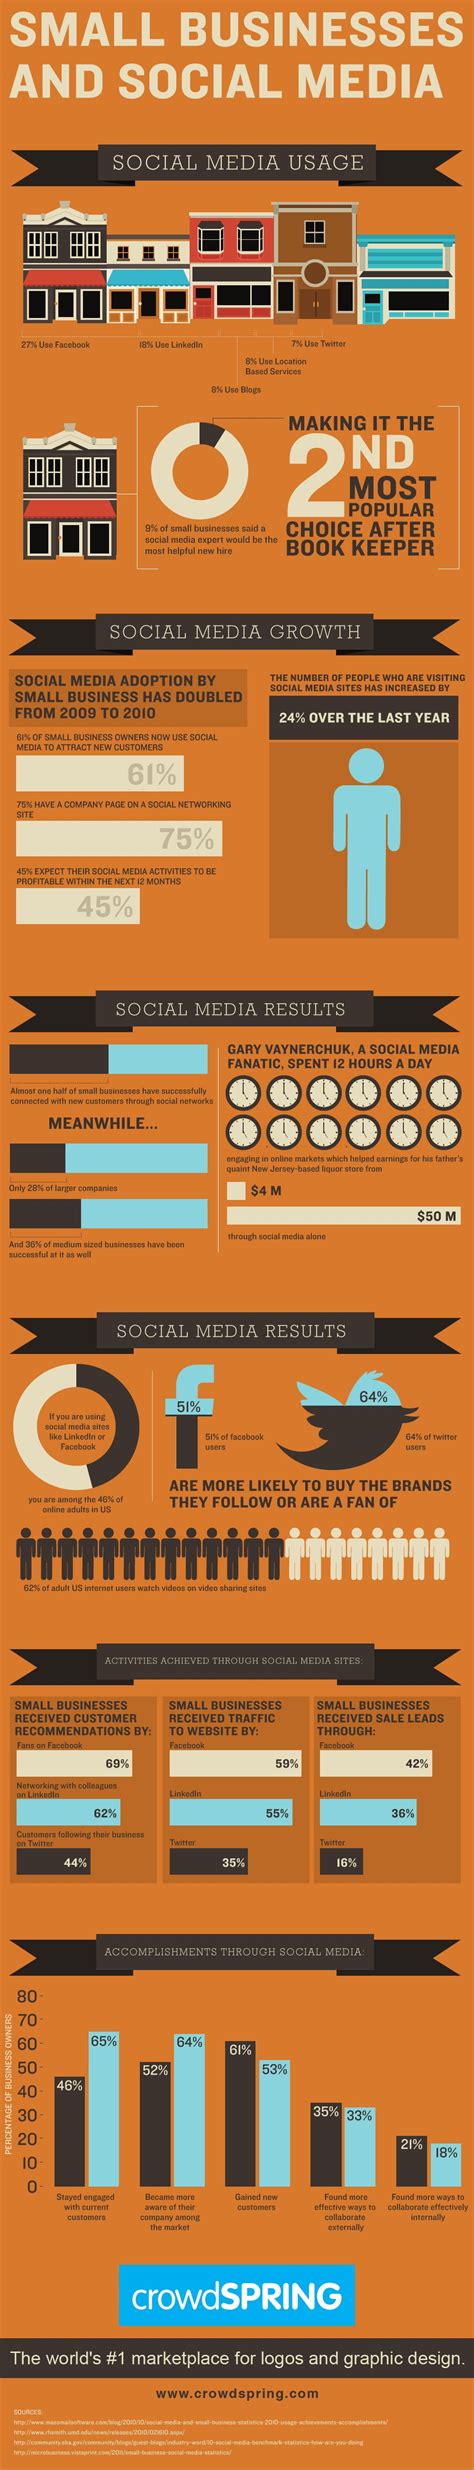 How Small Businesses Are Using Social Media Inbound Marketing